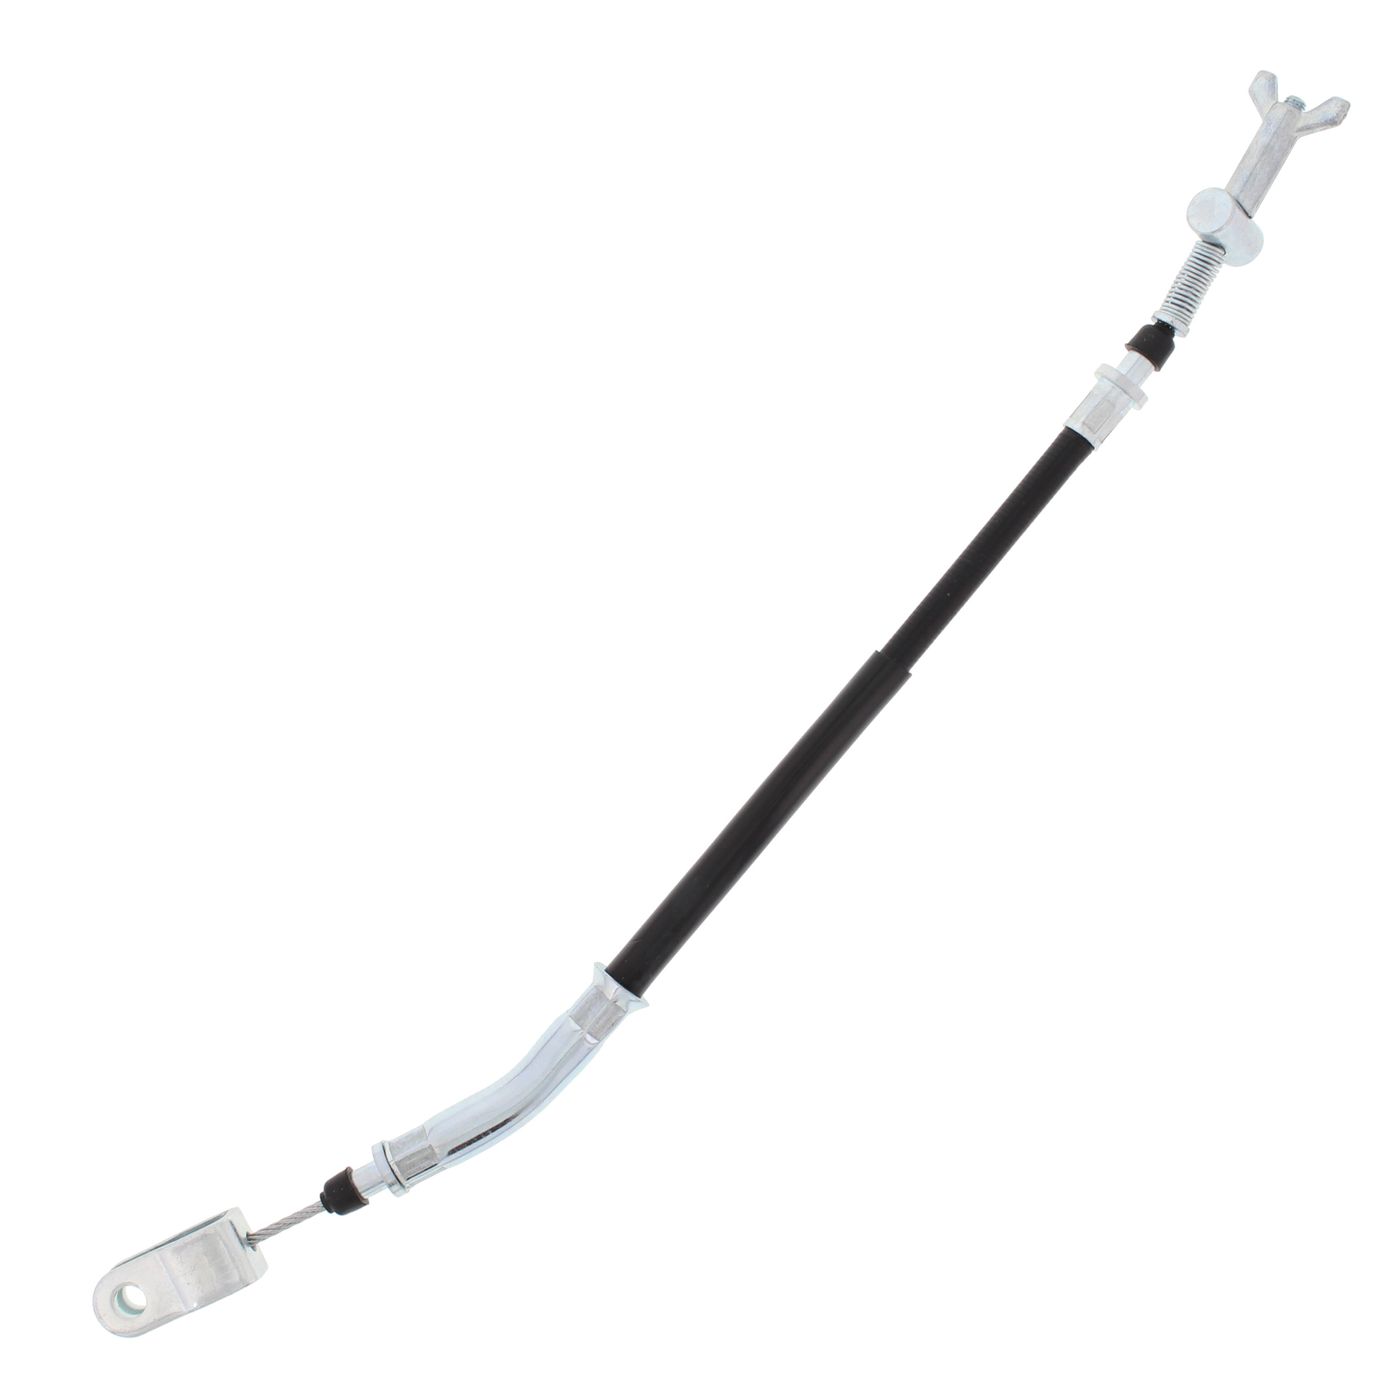 Wrp Brake Cables - WRP454053 image